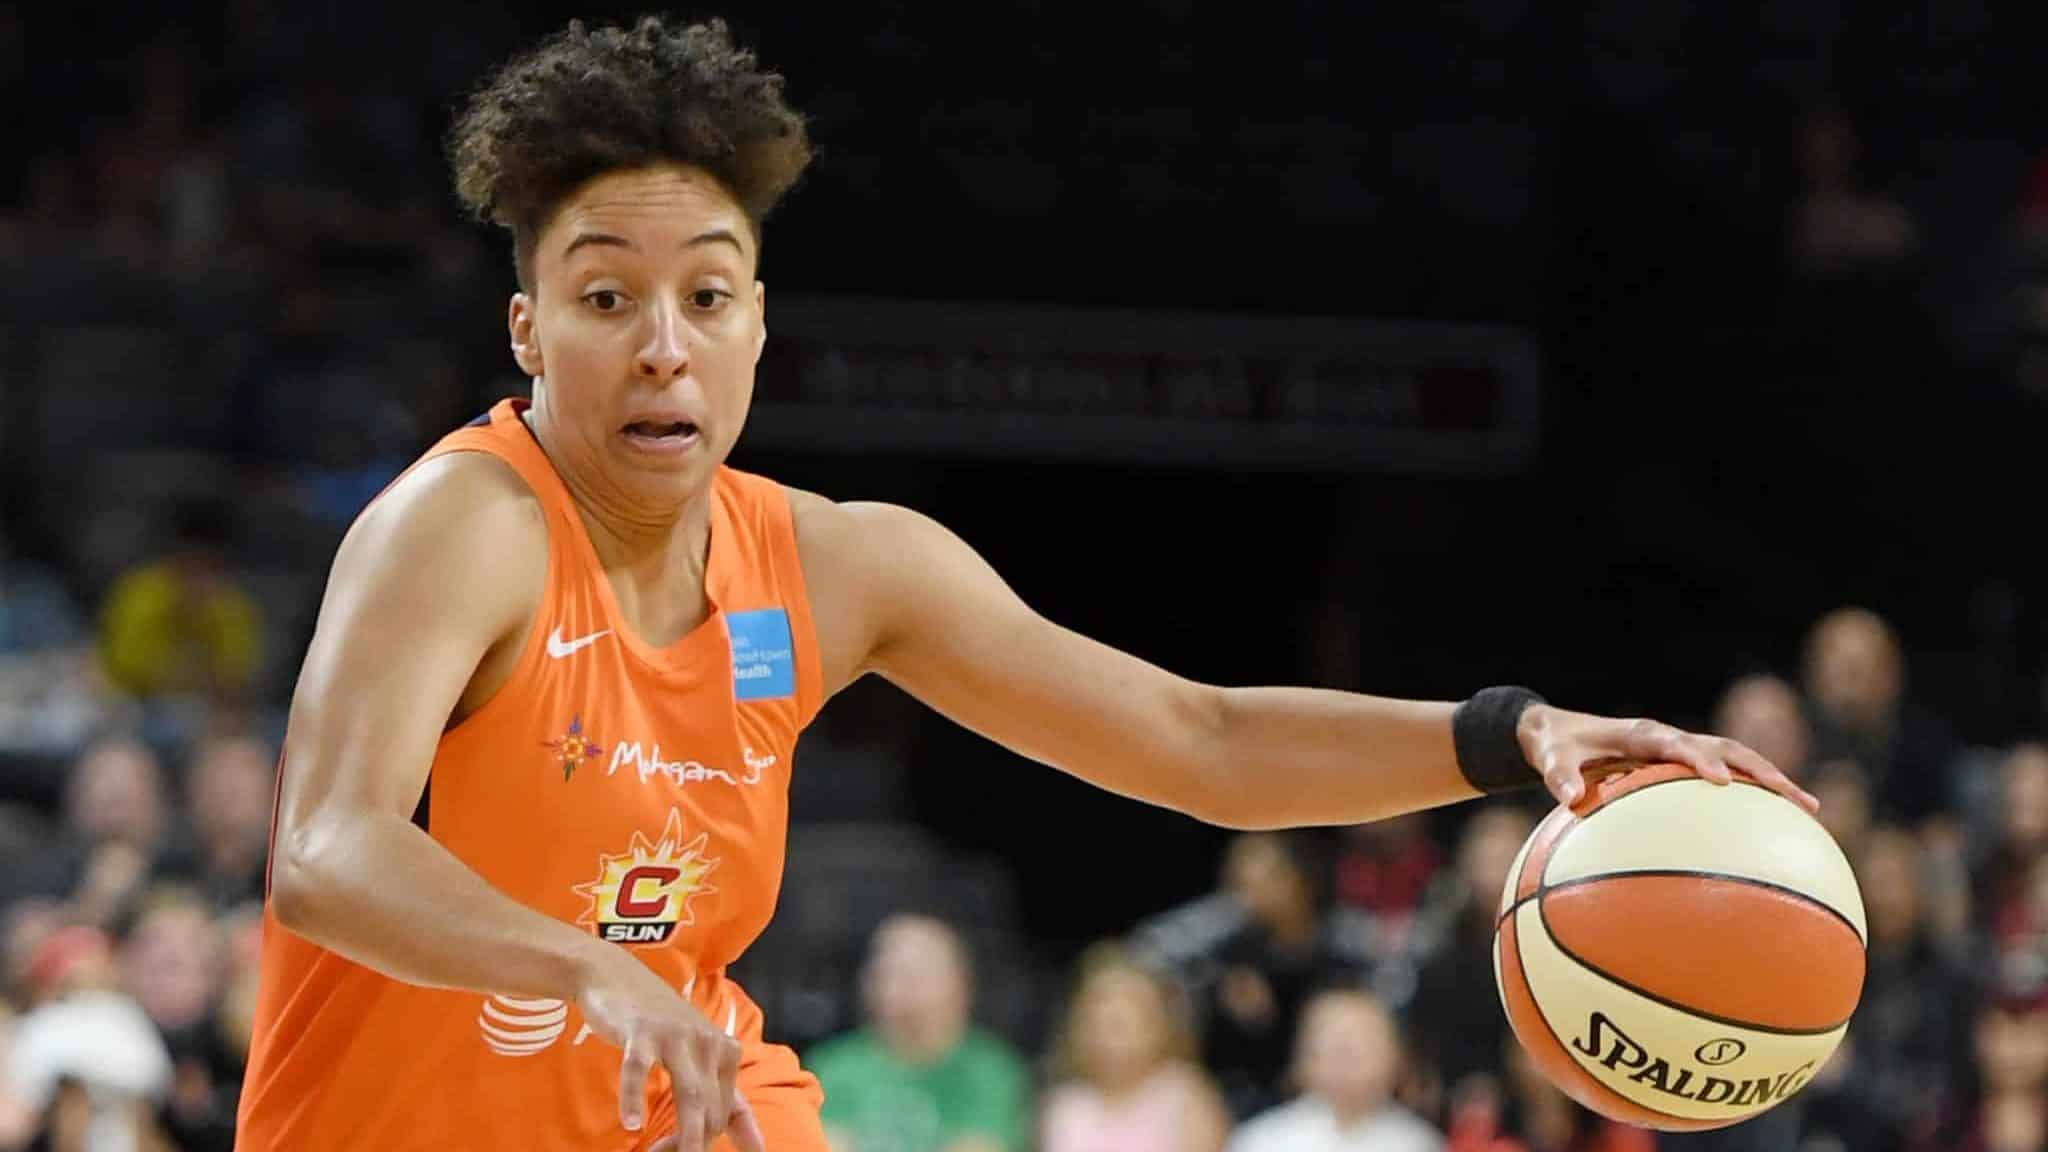 LAS VEGAS, NEVADA - JUNE 02: Layshia Clarendon #23 of the Connecticut Sun drives against the Las Vegas Aces during their game at the Mandalay Bay Events Center on June 2, 2019 in Las Vegas, Nevada. The Sun defeated the Aces 80-74. NOTE TO USER: User expressly acknowledges and agrees that, by downloading and or using this photograph, User is consenting to the terms and conditions of the Getty Images License Agreement.